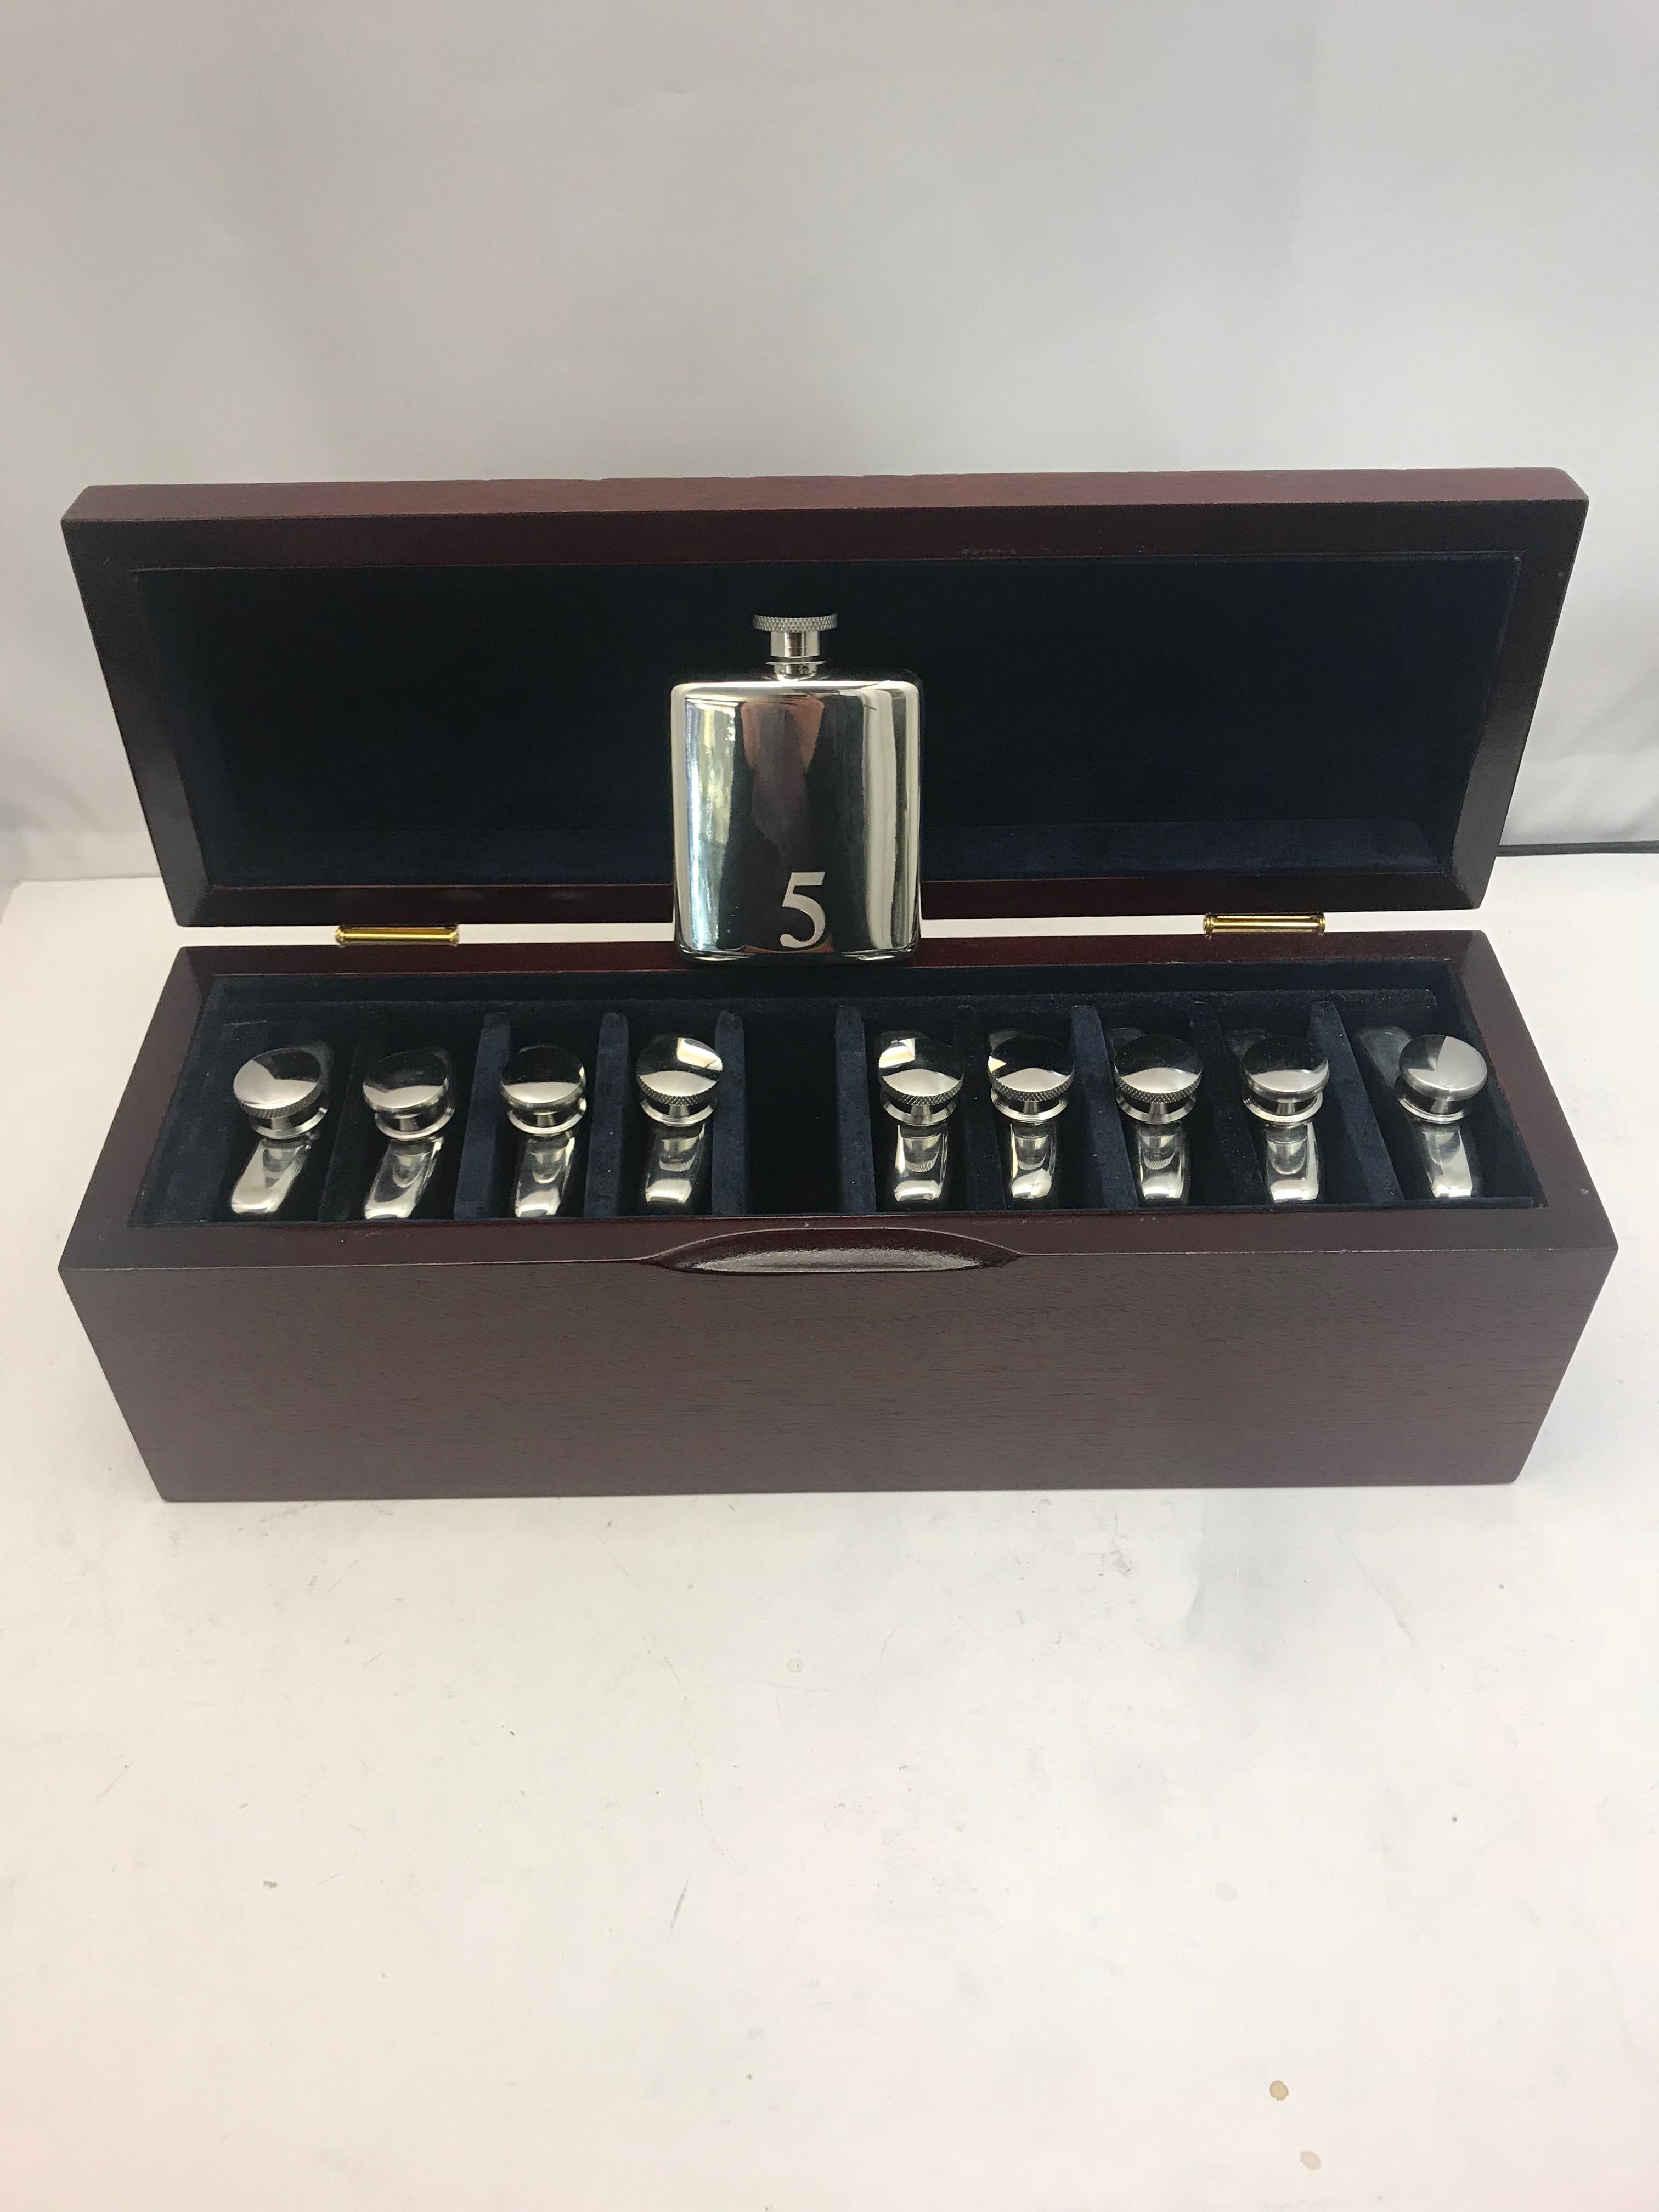 Set of 10 numbered silver plate flasks in a fitted wooden box. Ideal for 'Butt markers'.